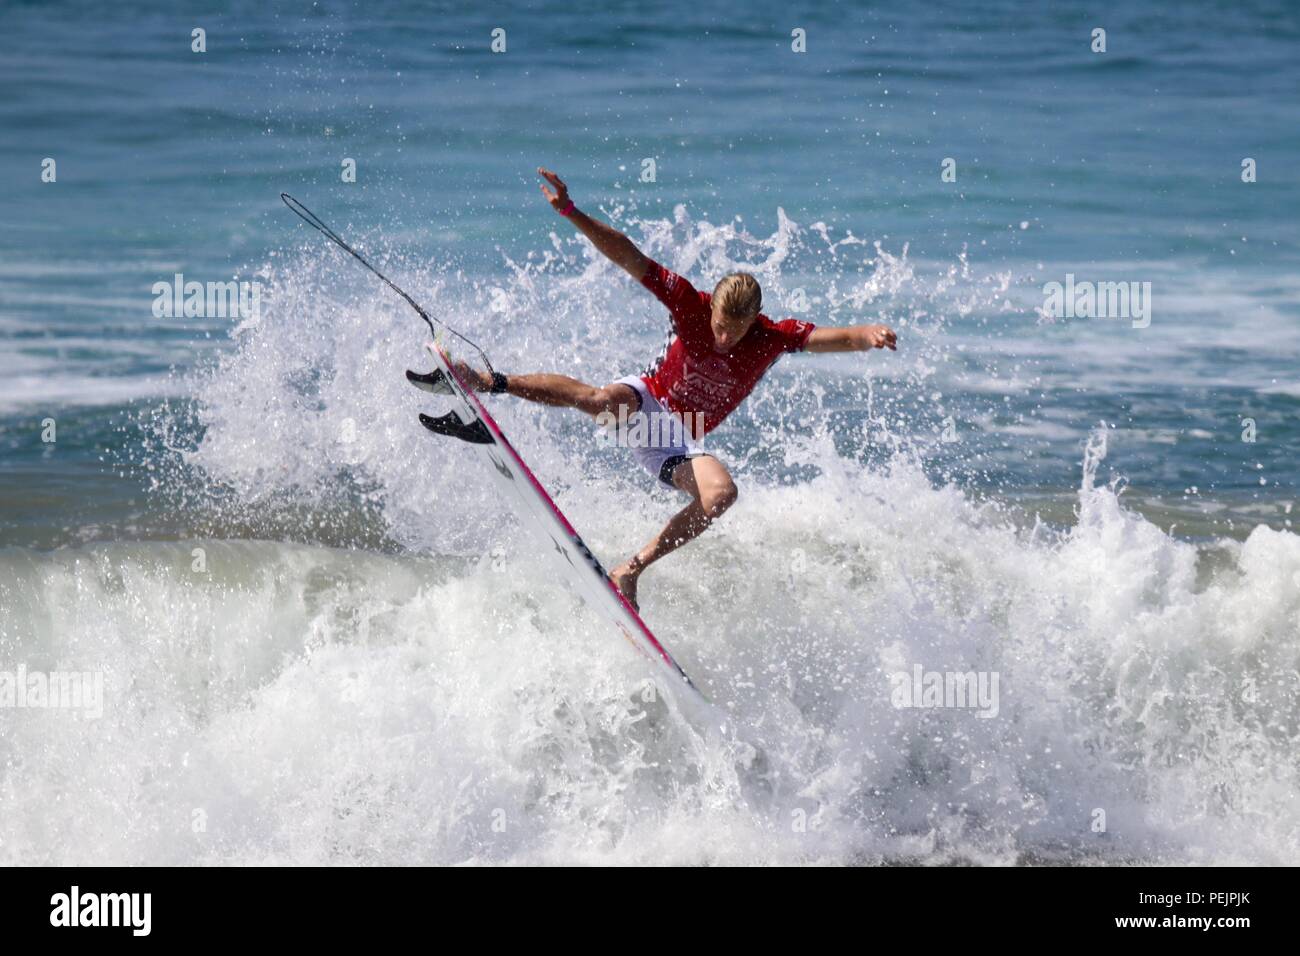 Kolohe Andino competing in the US Open of Surfing 2018 Stock Photo